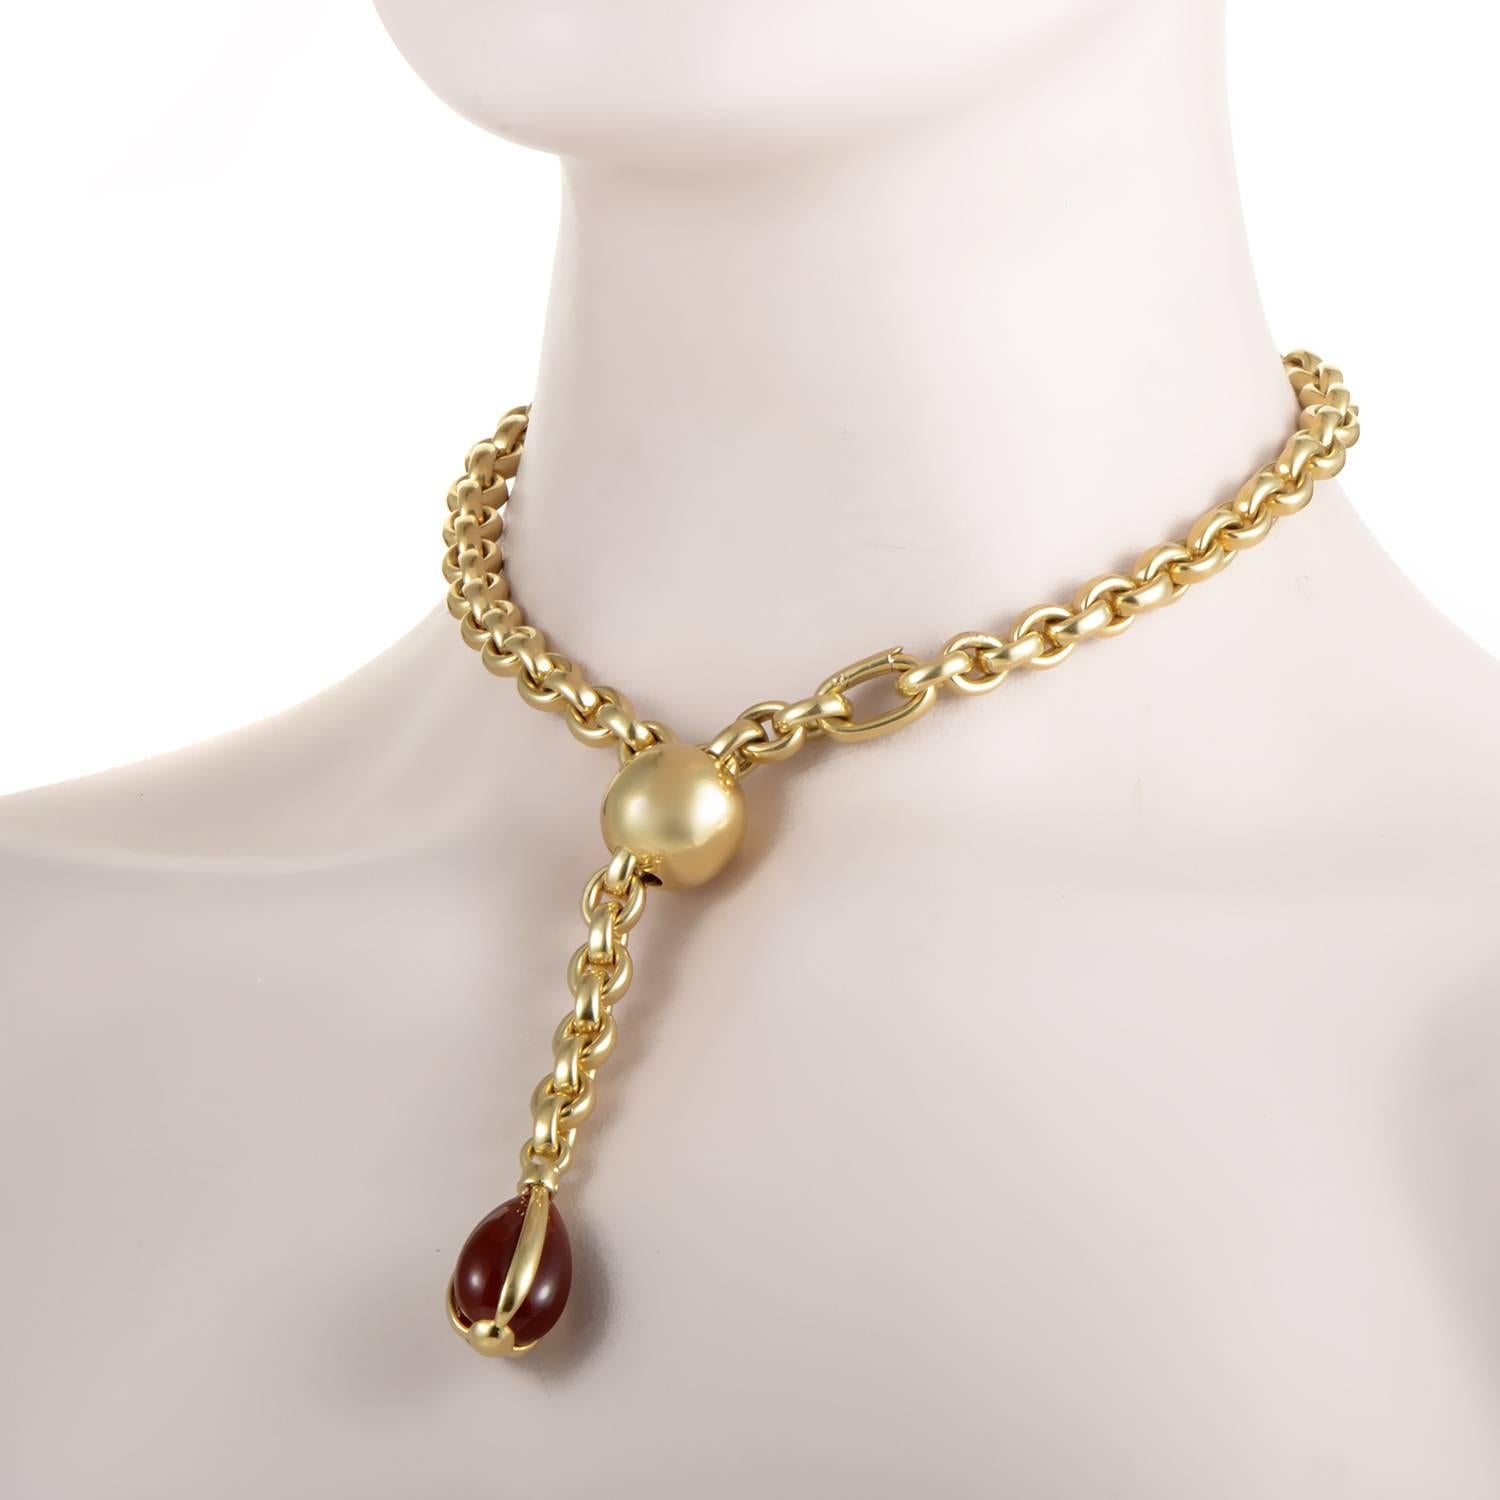 Fantastic flamboyance and exuberance of 18K yellow gold is enhanced by the brilliant design of the chain and impeccable crafting while the fashionable sight is completed by the majestic carnelian stone exuding its powerful nuance at the